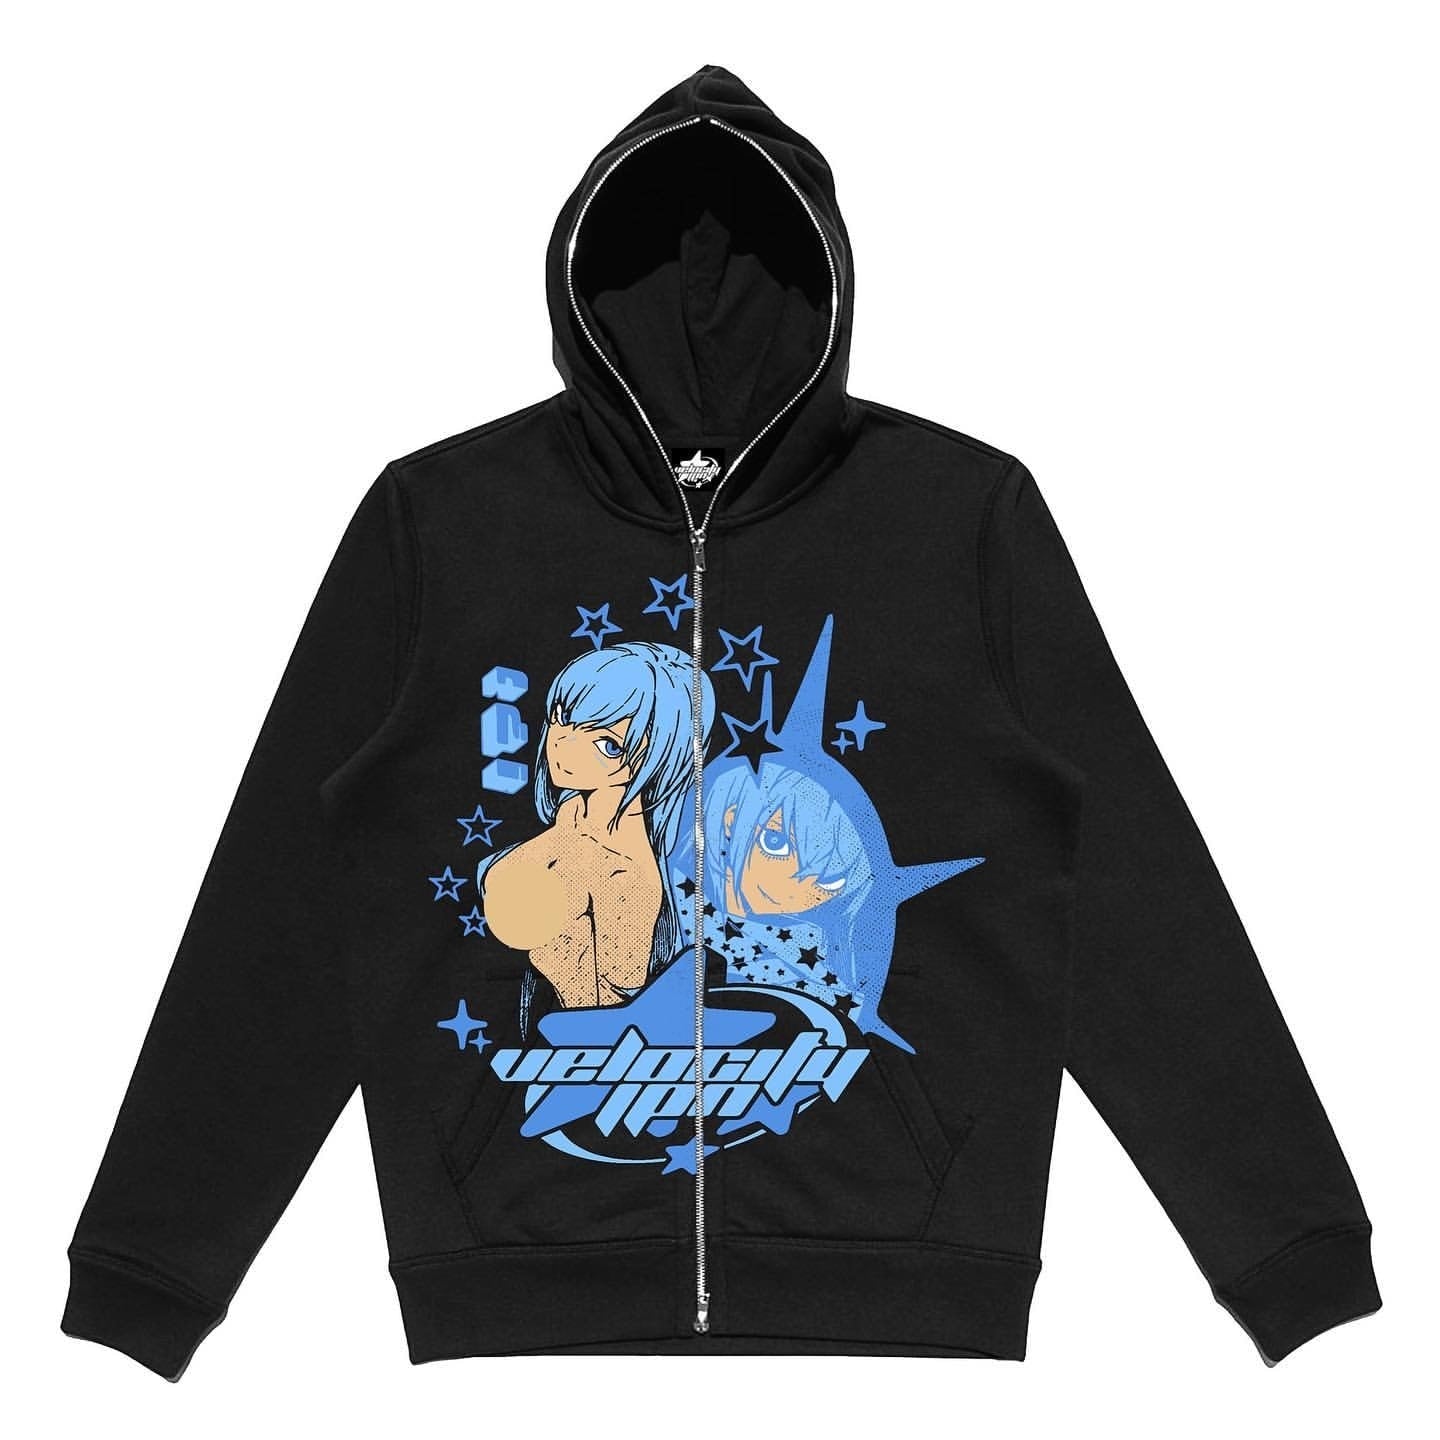 Anime - Streetwear - "VELOCITY" - Soul Eater Anime Oversized Hoodie | 5 Colors - Alpha Weebs